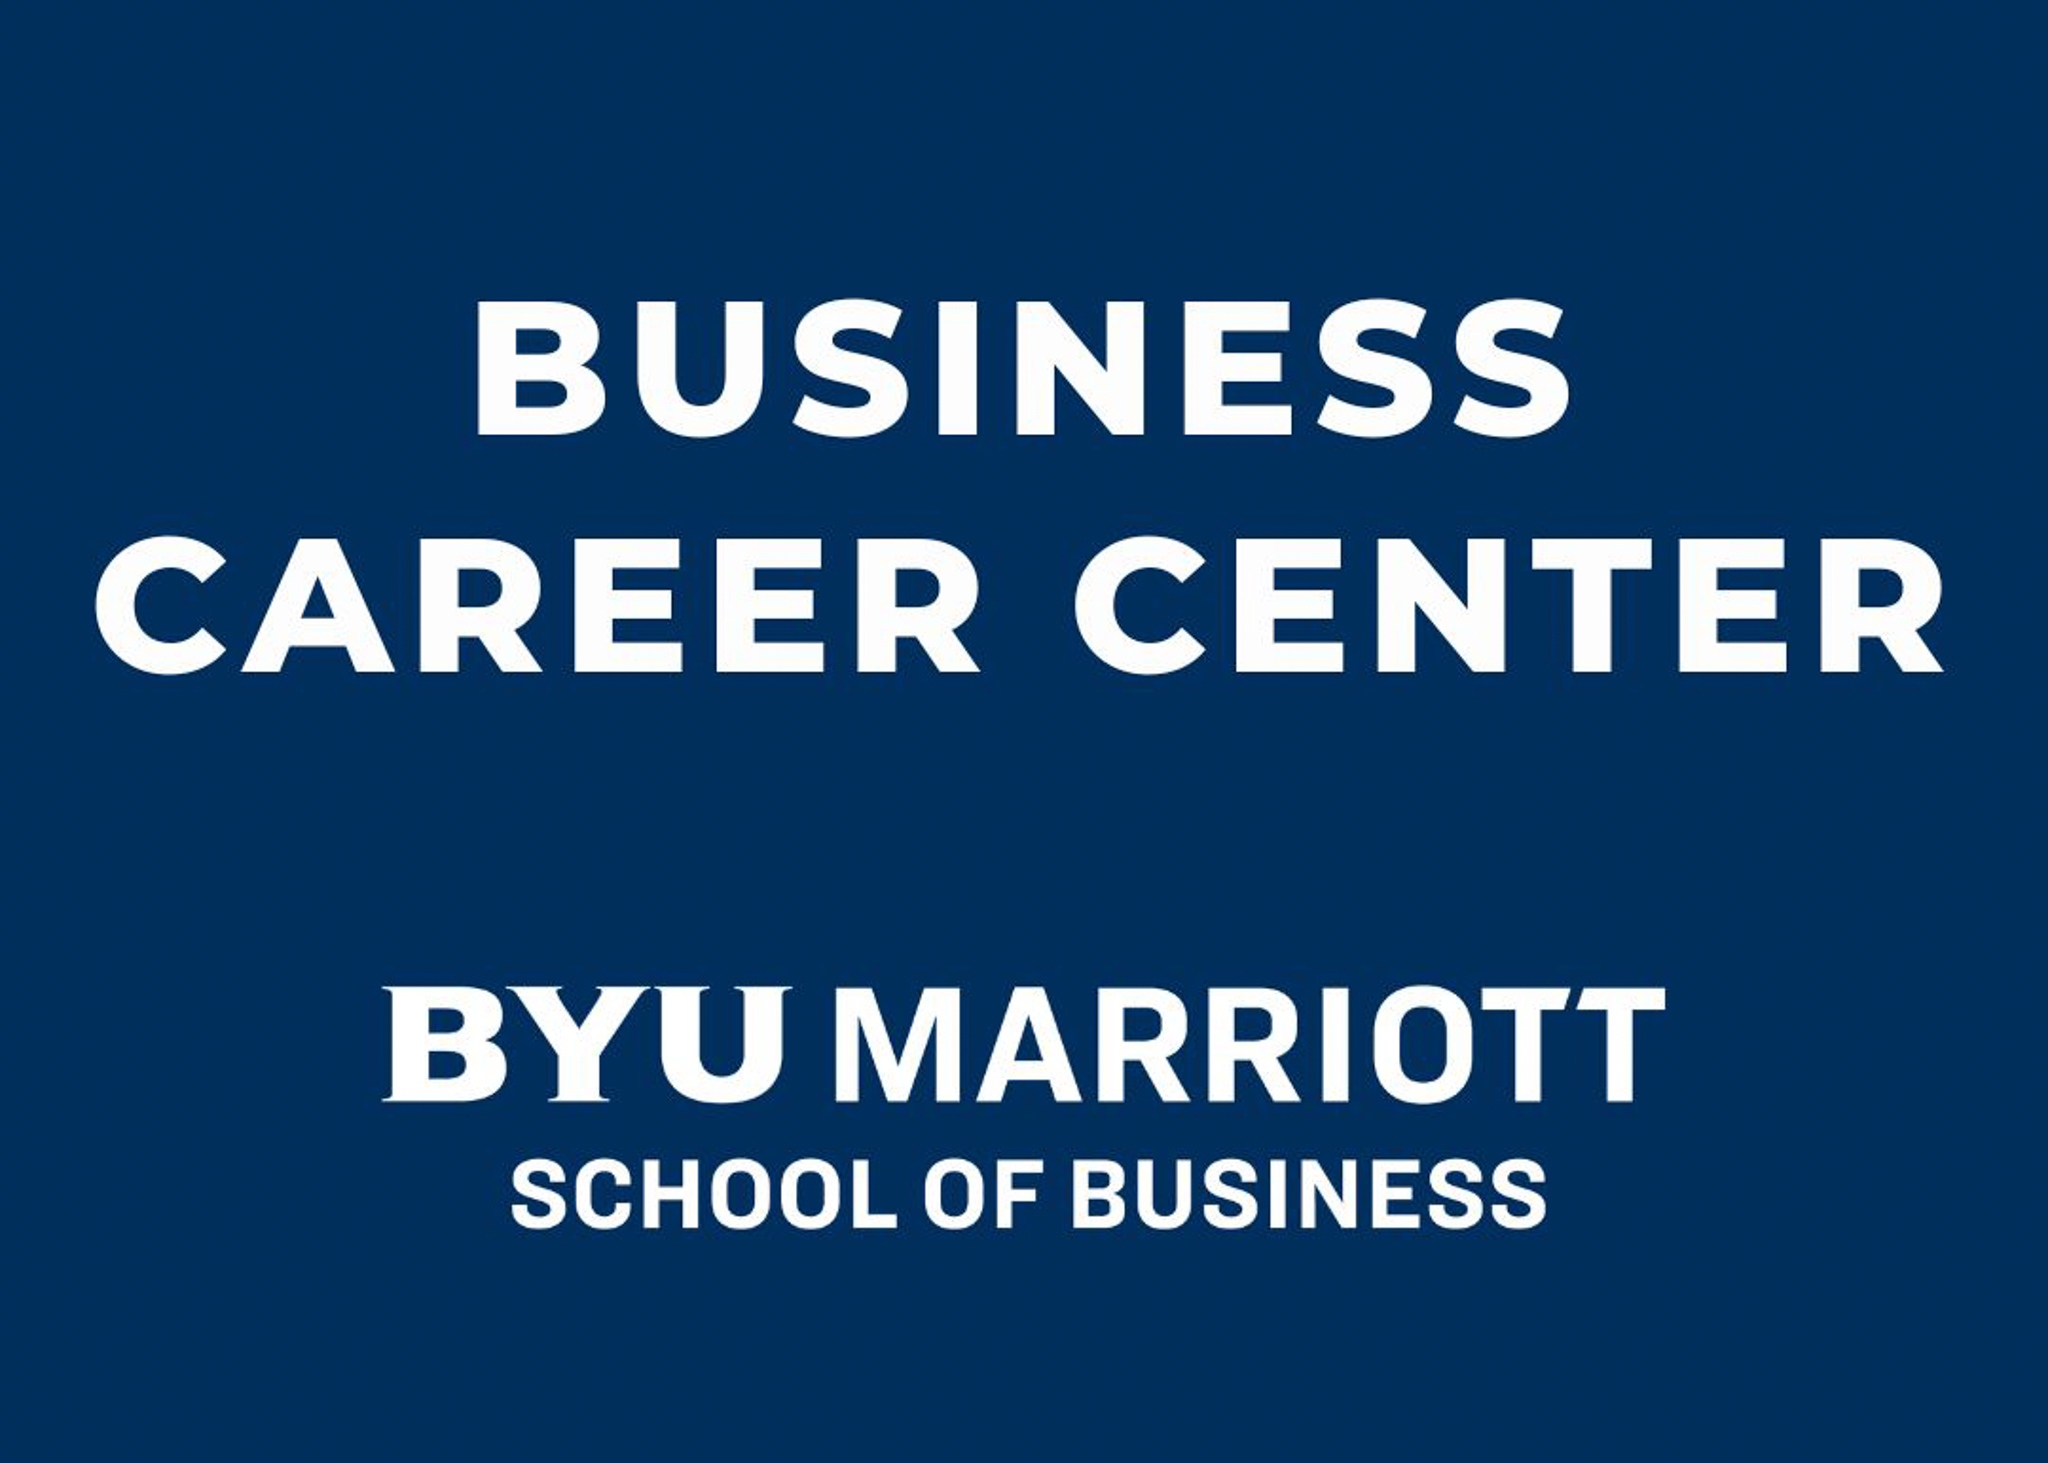 Blue background with text that says Business Career Center, BYU Marriott School of Business